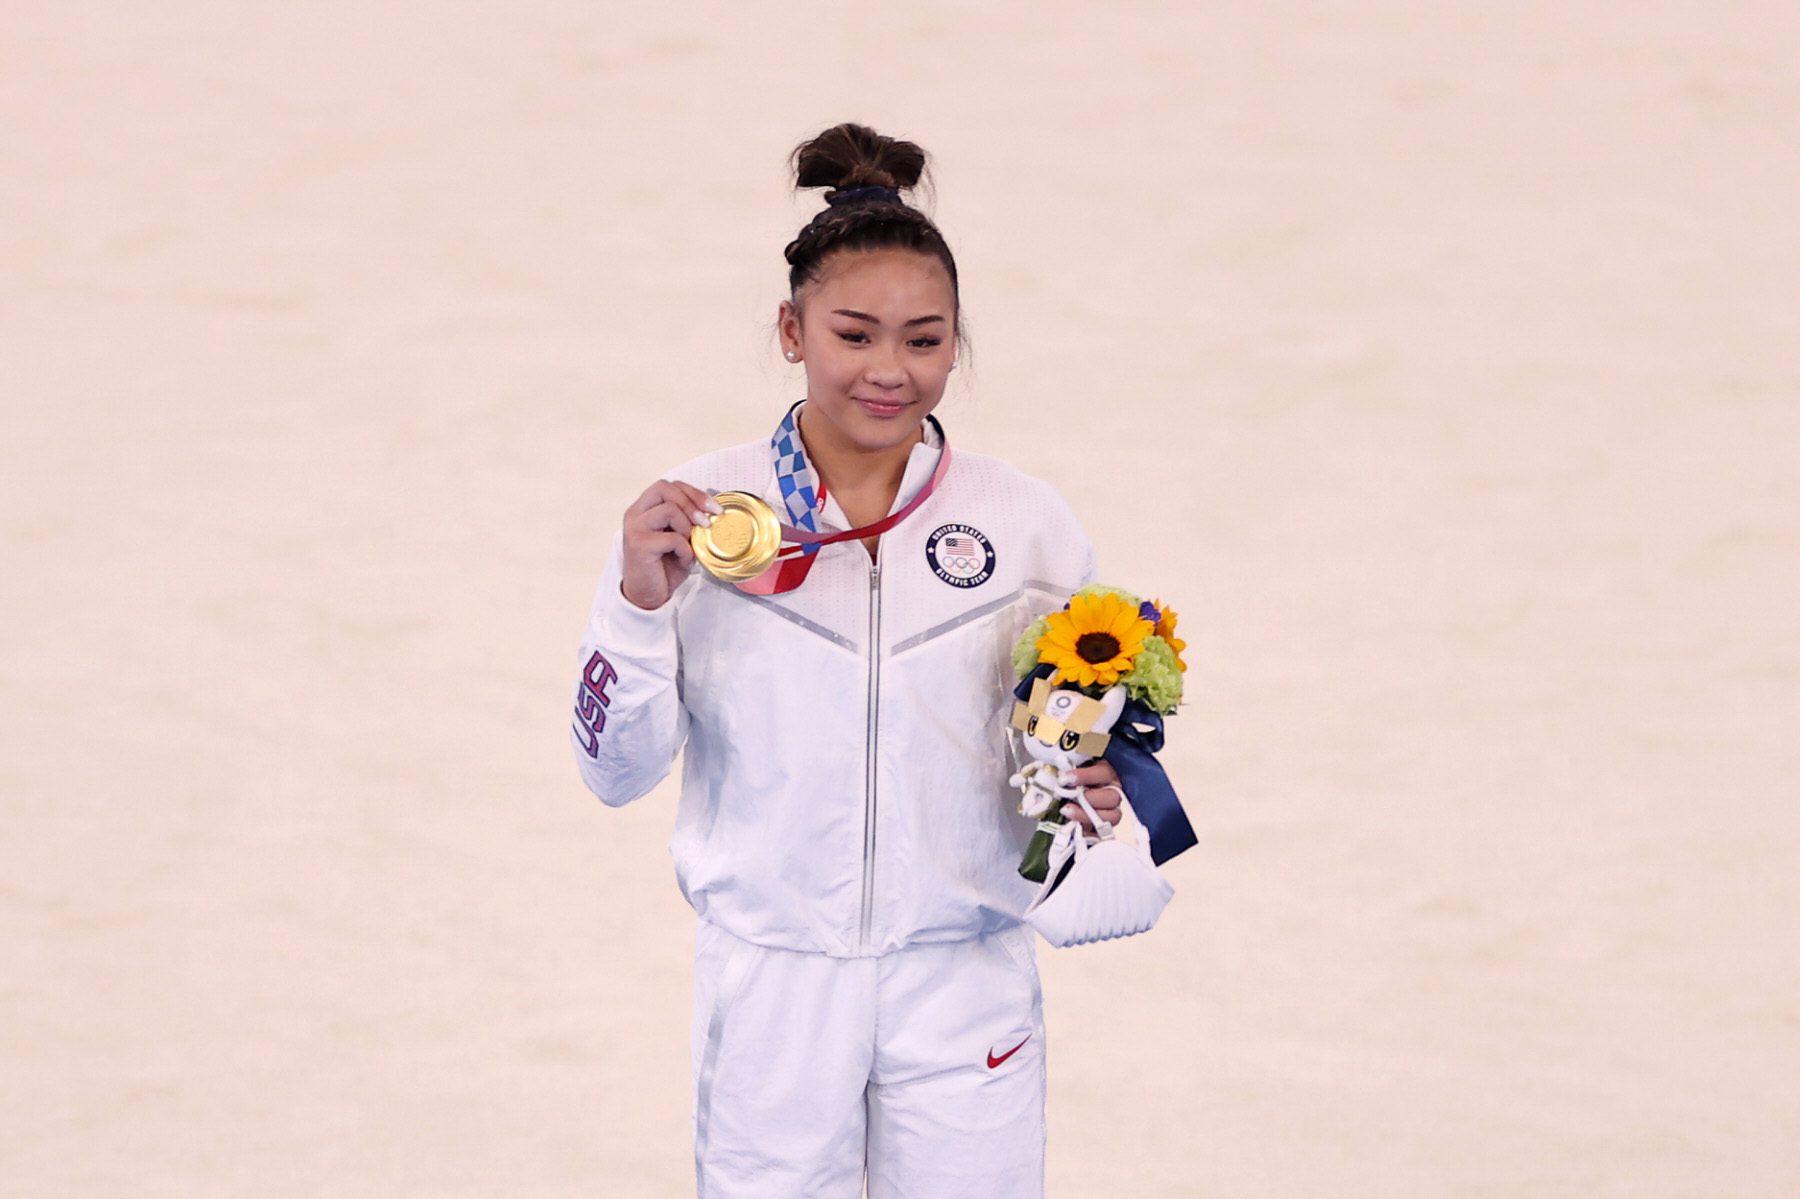 Sunisa Lee wins Olympic gold, a first for Hmong Americans pic